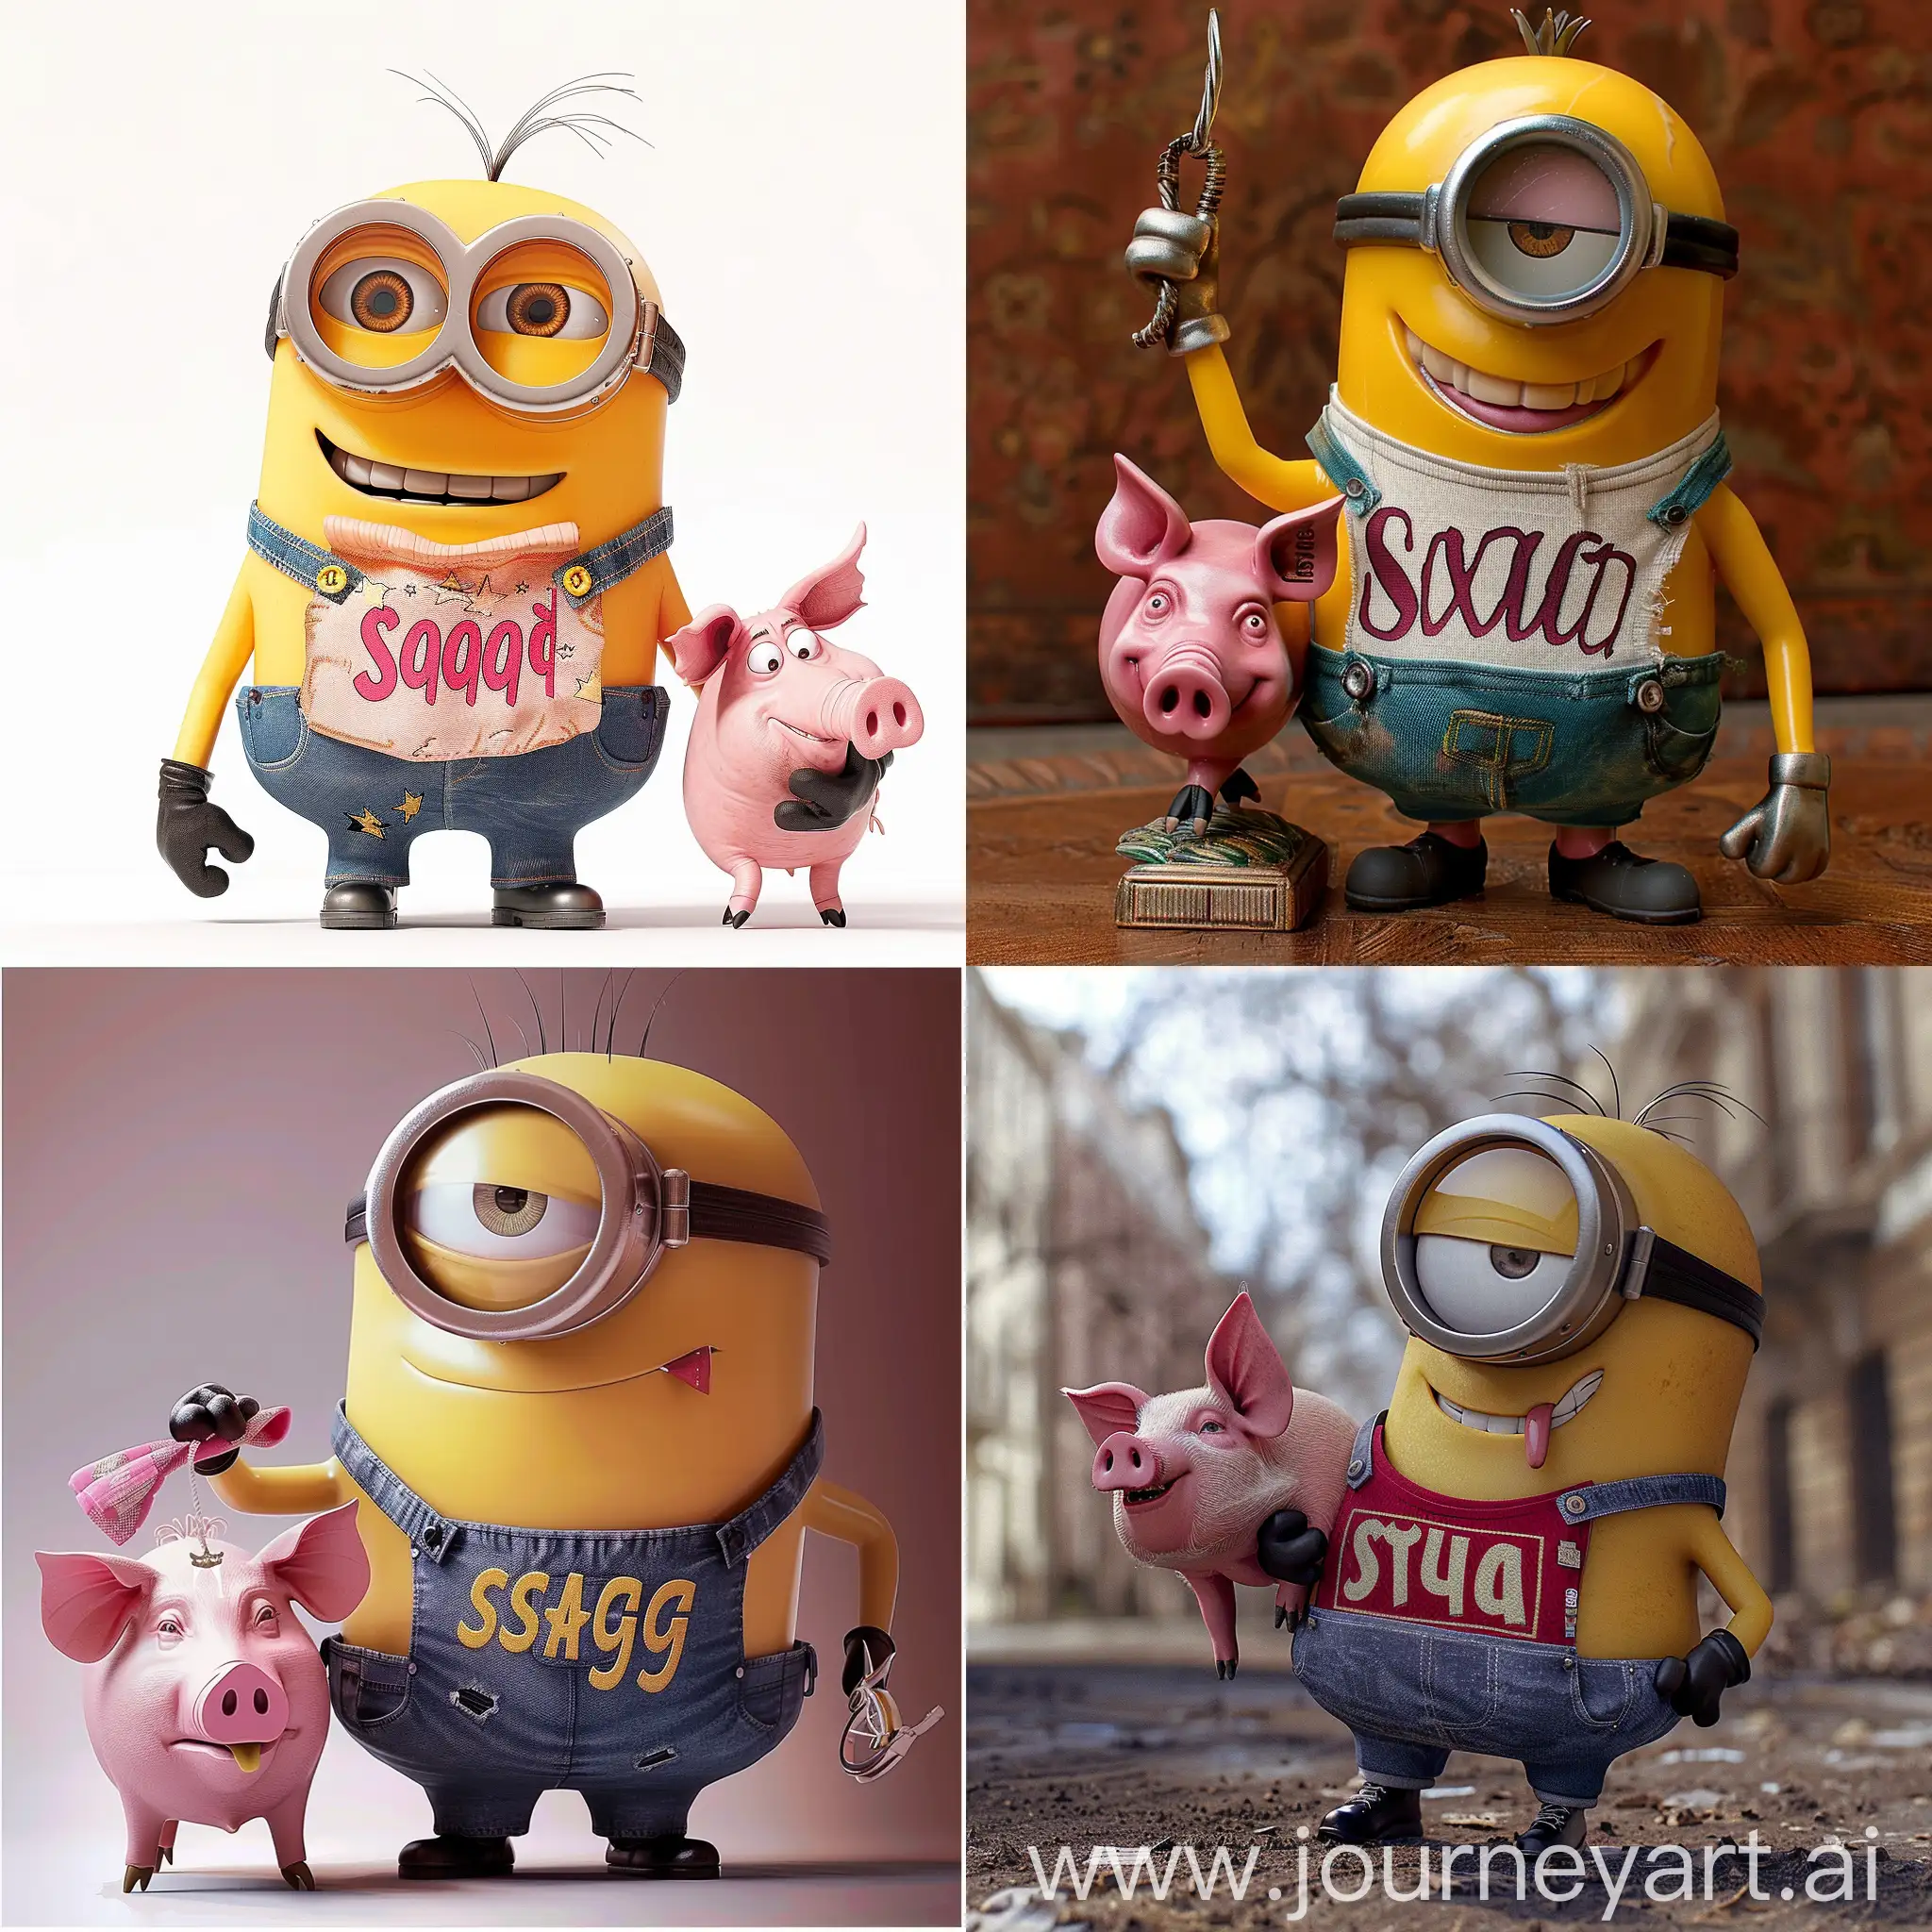 Buffed-Minion-with-Swag-Shirt-Holding-Pig